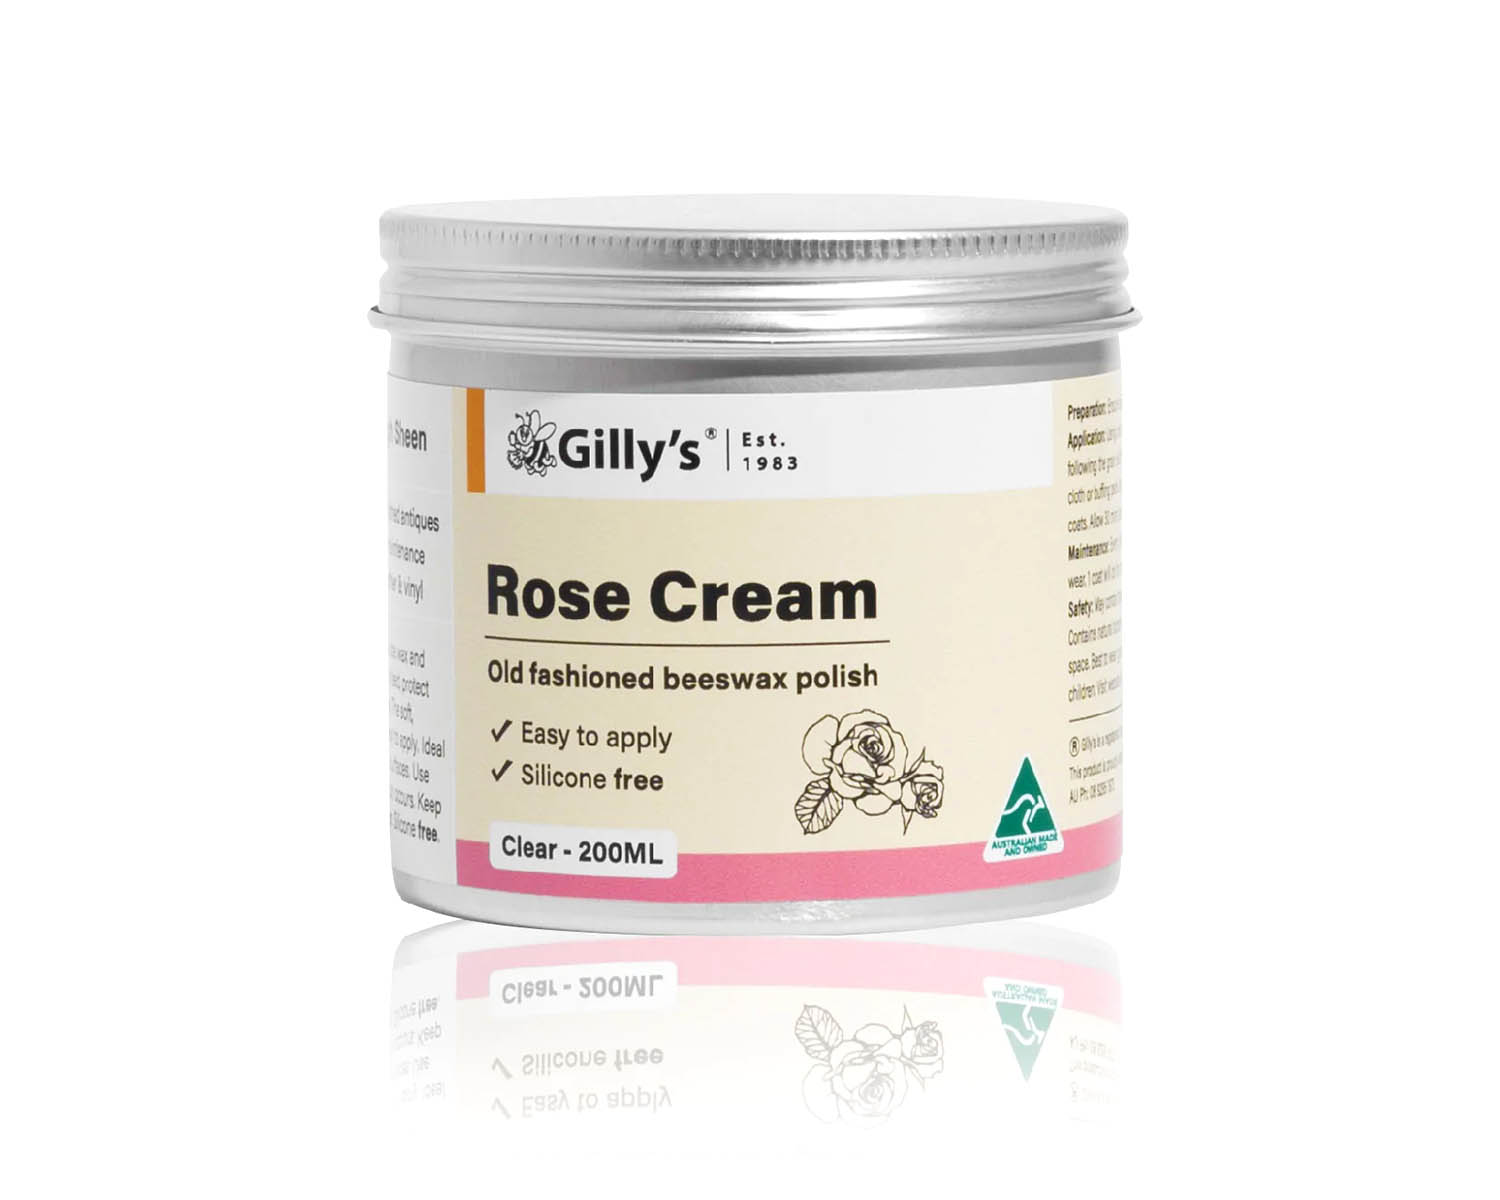 Cream Polish - Old Fashioned Beeswax Polish - Rose Scent - 250ml - Gilly's ®